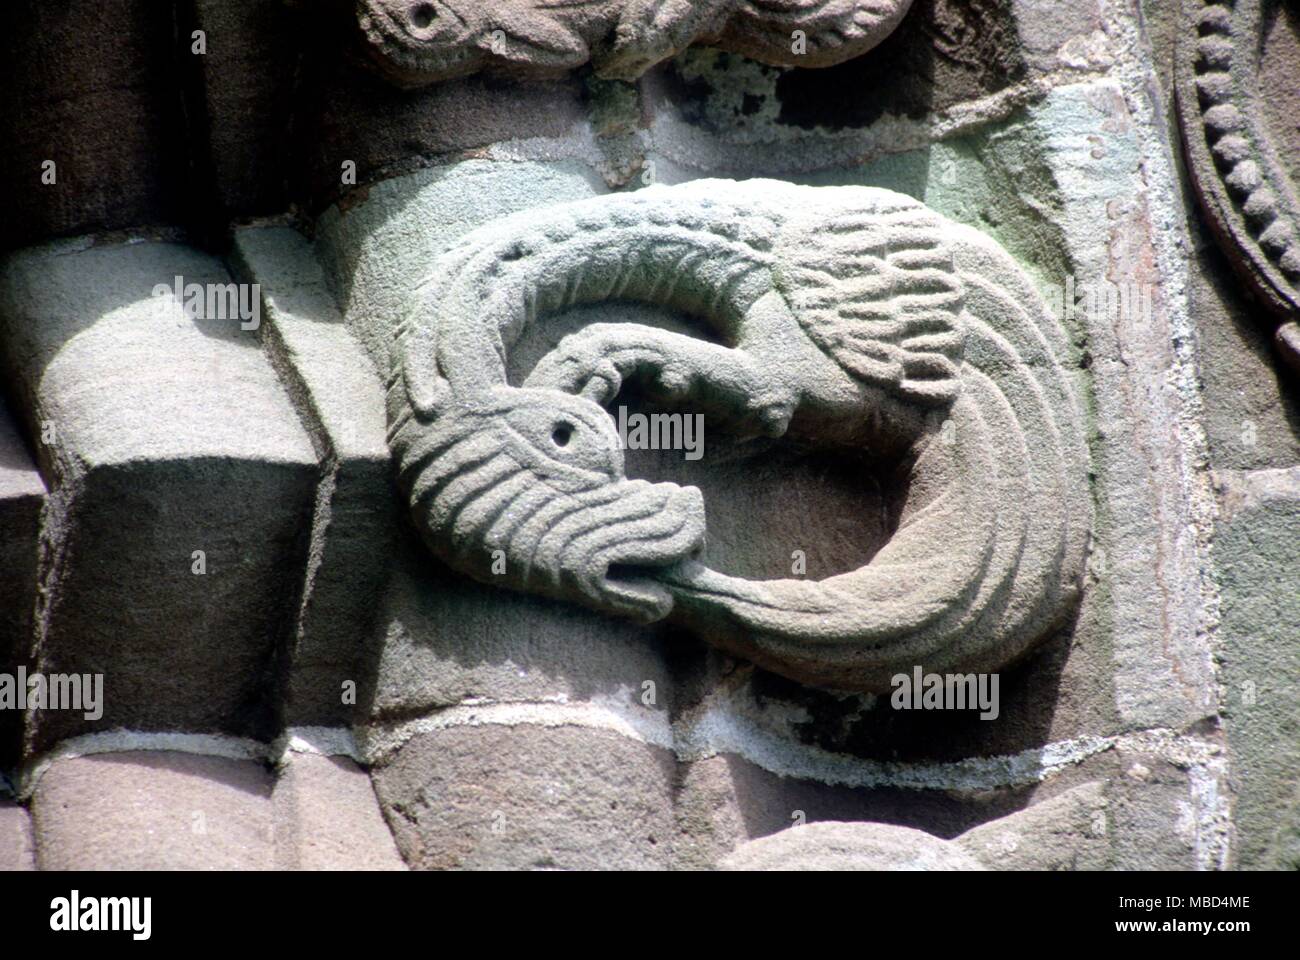 Dragons - Ouroboros serpent - the Ouroboros dragon, or serpent - a mediaeval symbol of Time (devouring even itself). On the south door of Kilpeck church. Twelfth century. © / Charles Walker Stock Photo